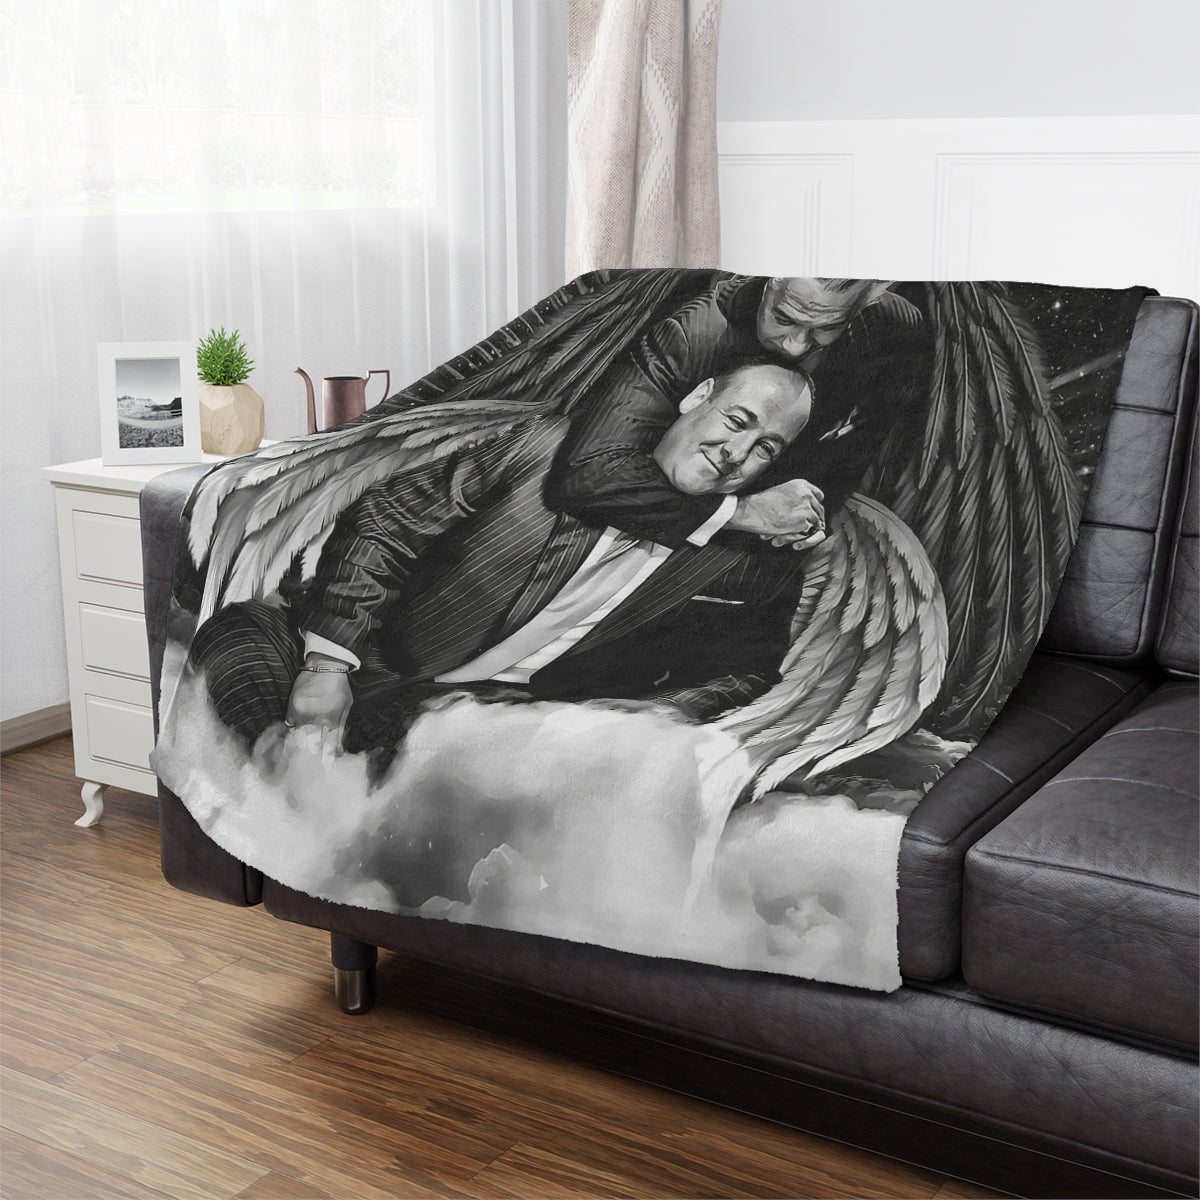 Gangsters and Angels Sopranos Minky Blanket - Premium Home Decor